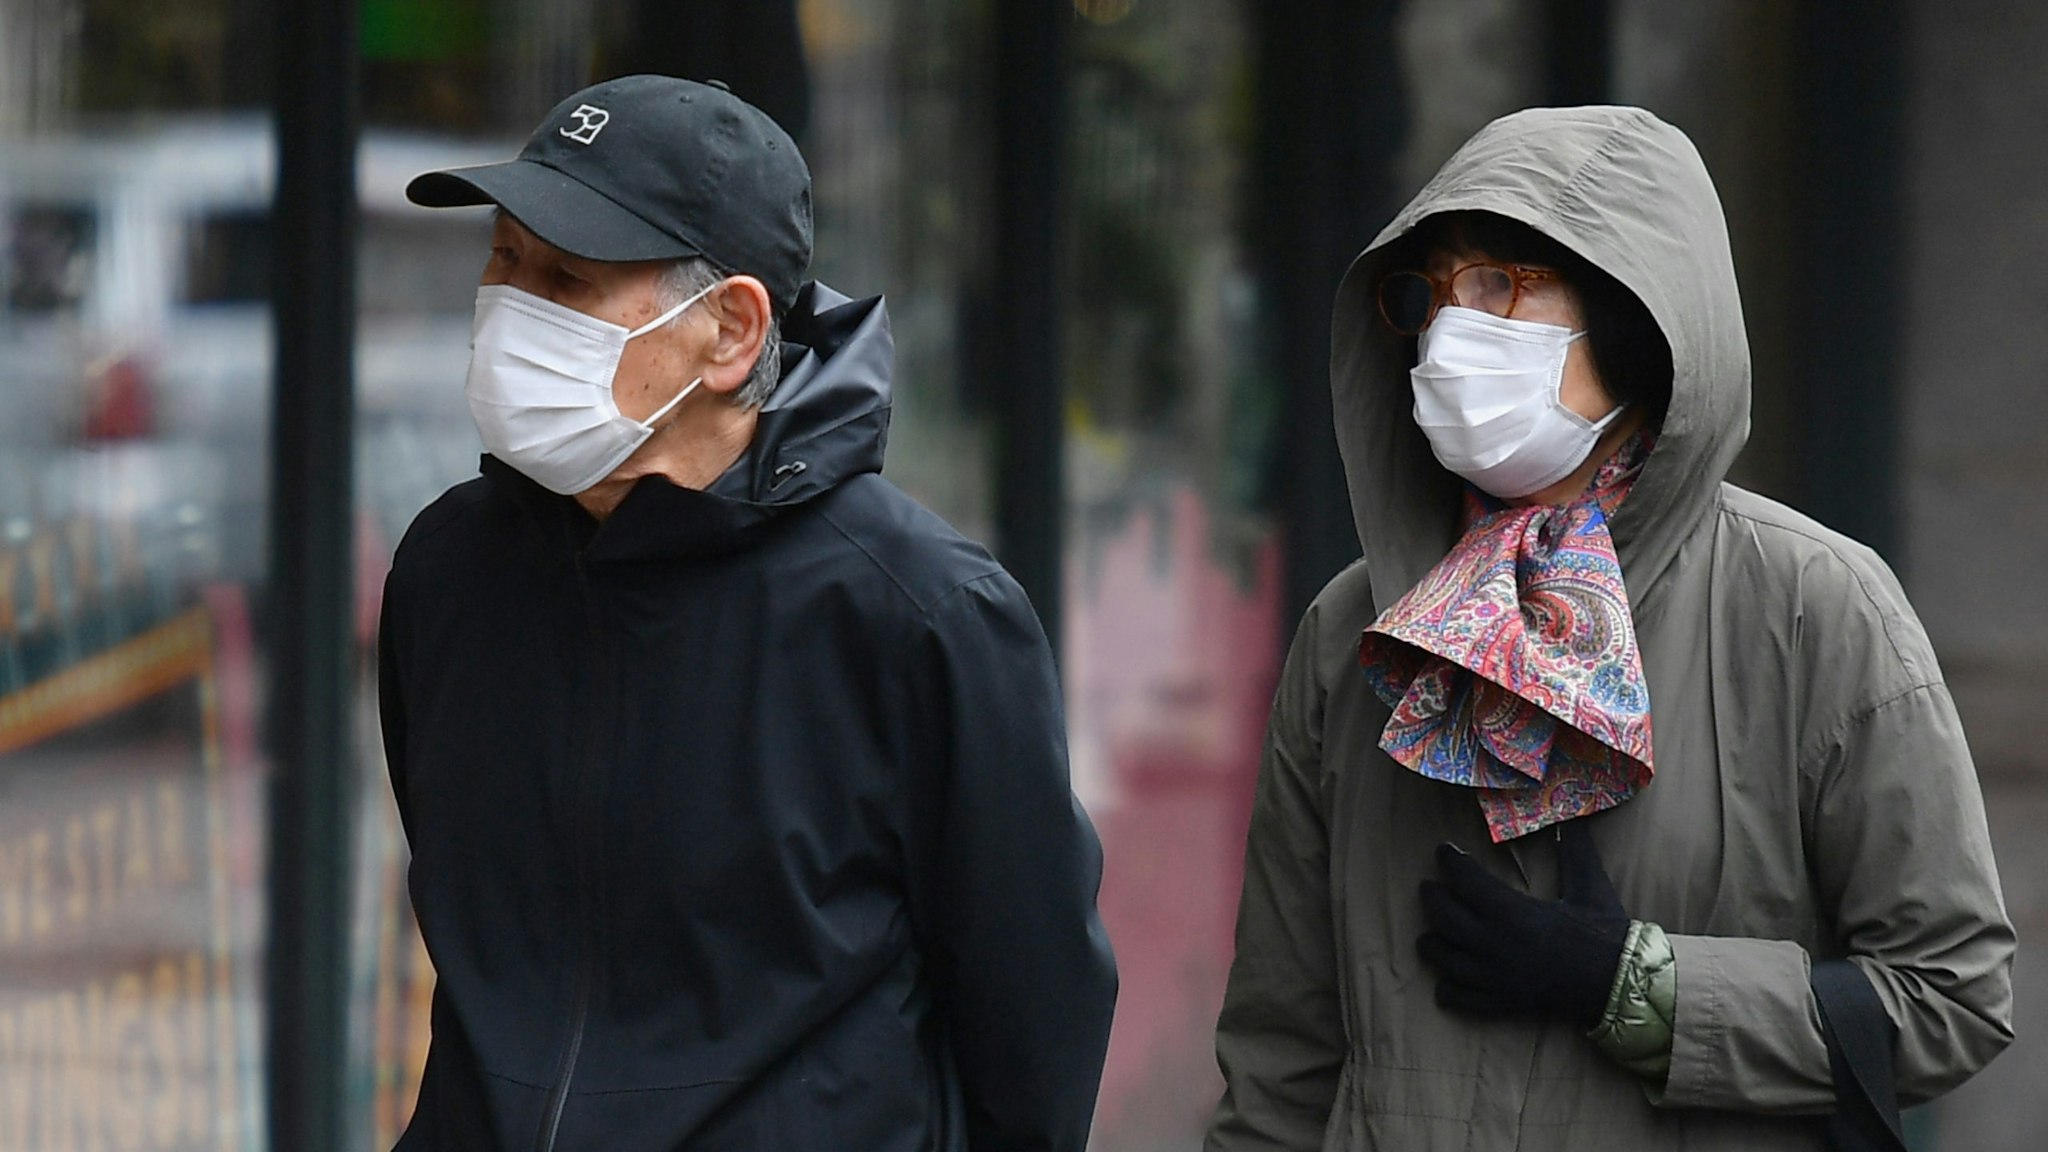 People wear face masks on April 03, 2020 in New York.